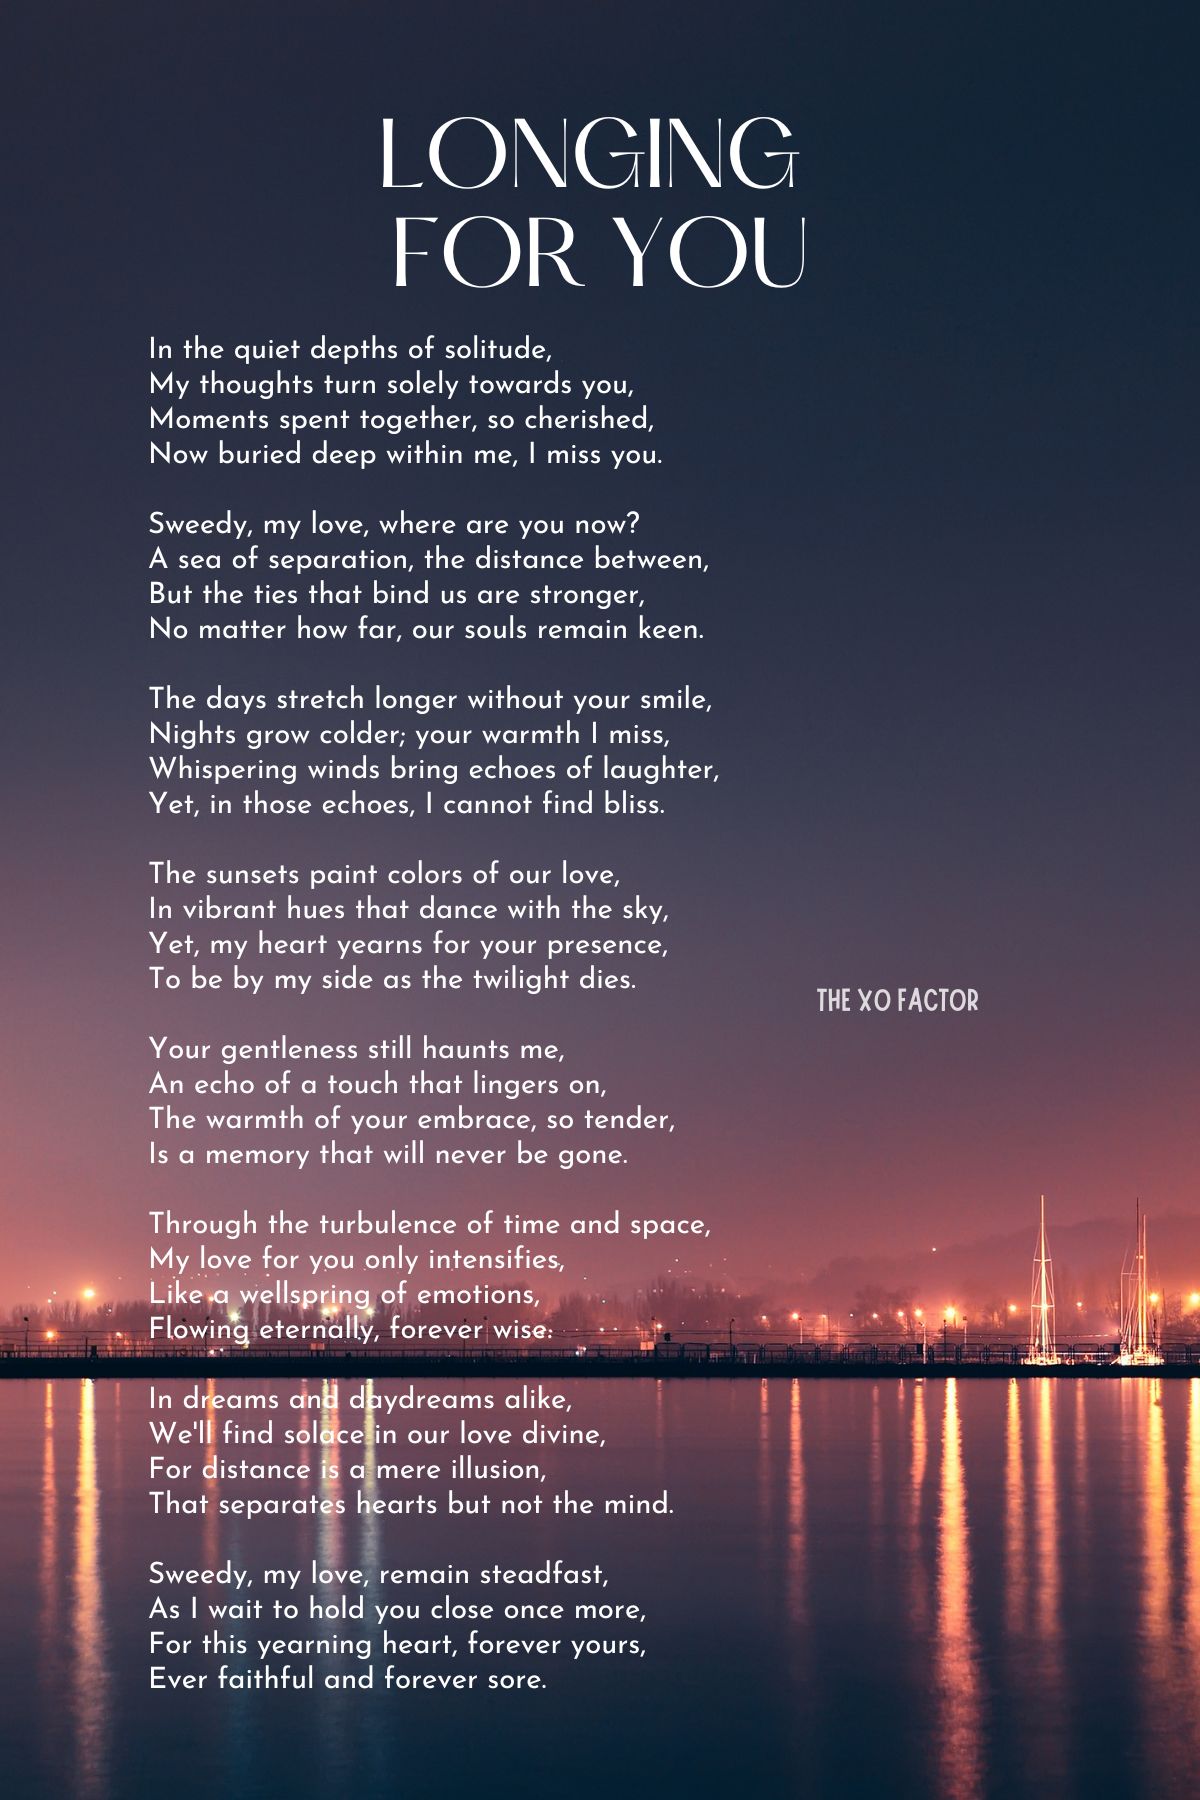 Longing for you poem